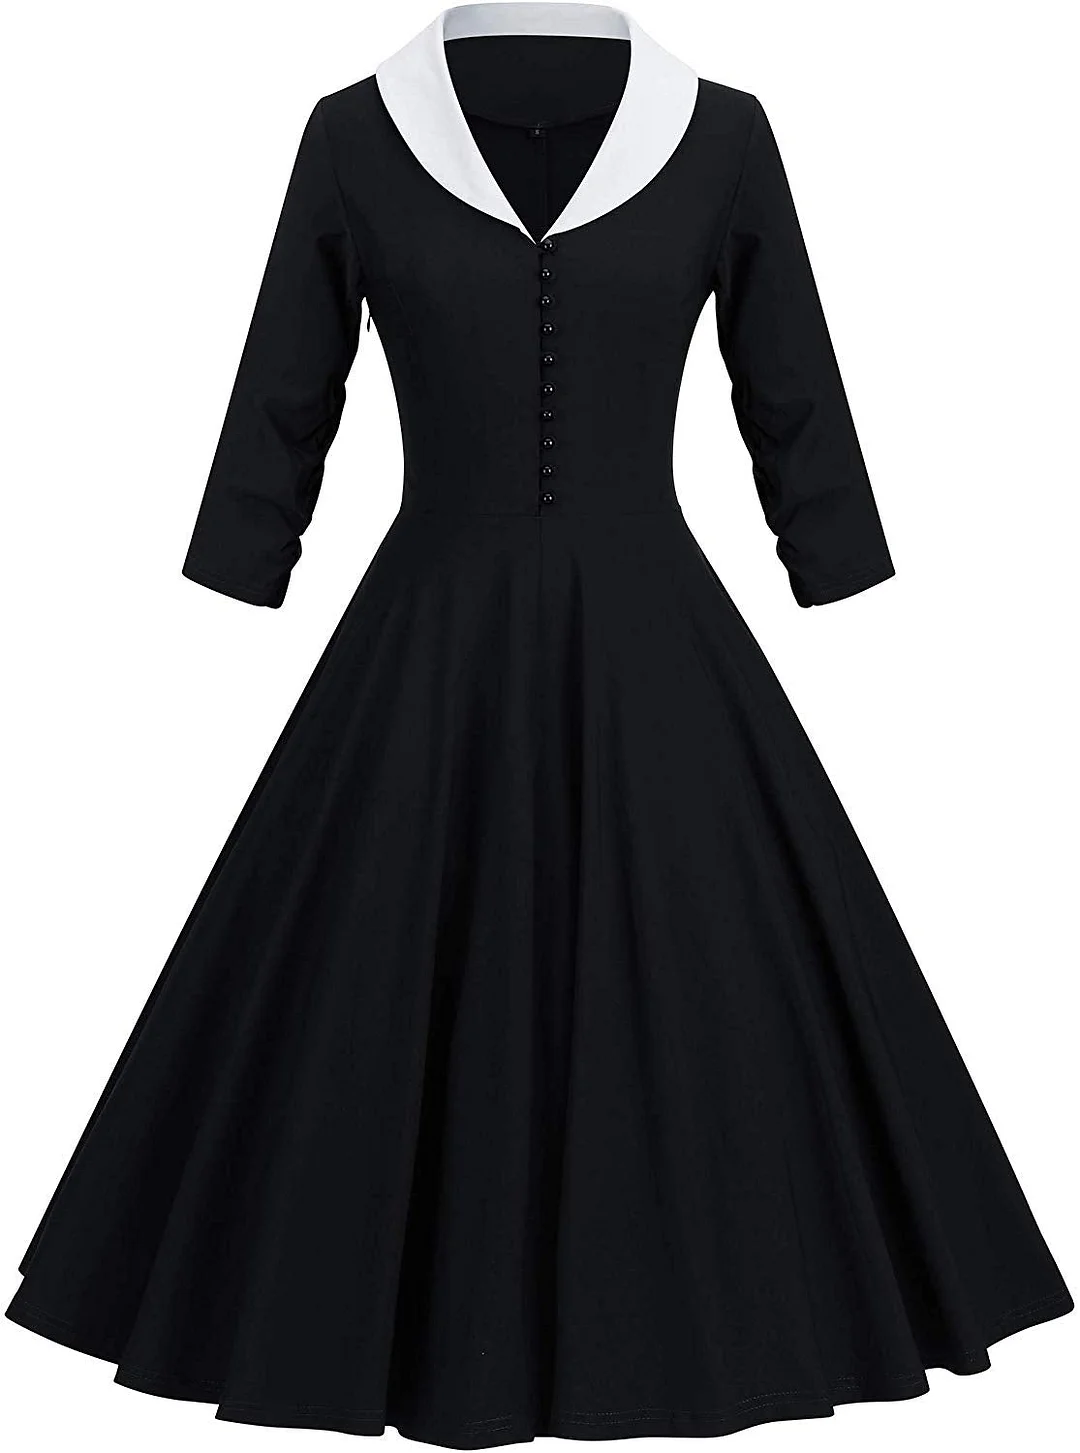 1950s Dress Womens Cape Collar Vintage Swing Stretchy Dresses